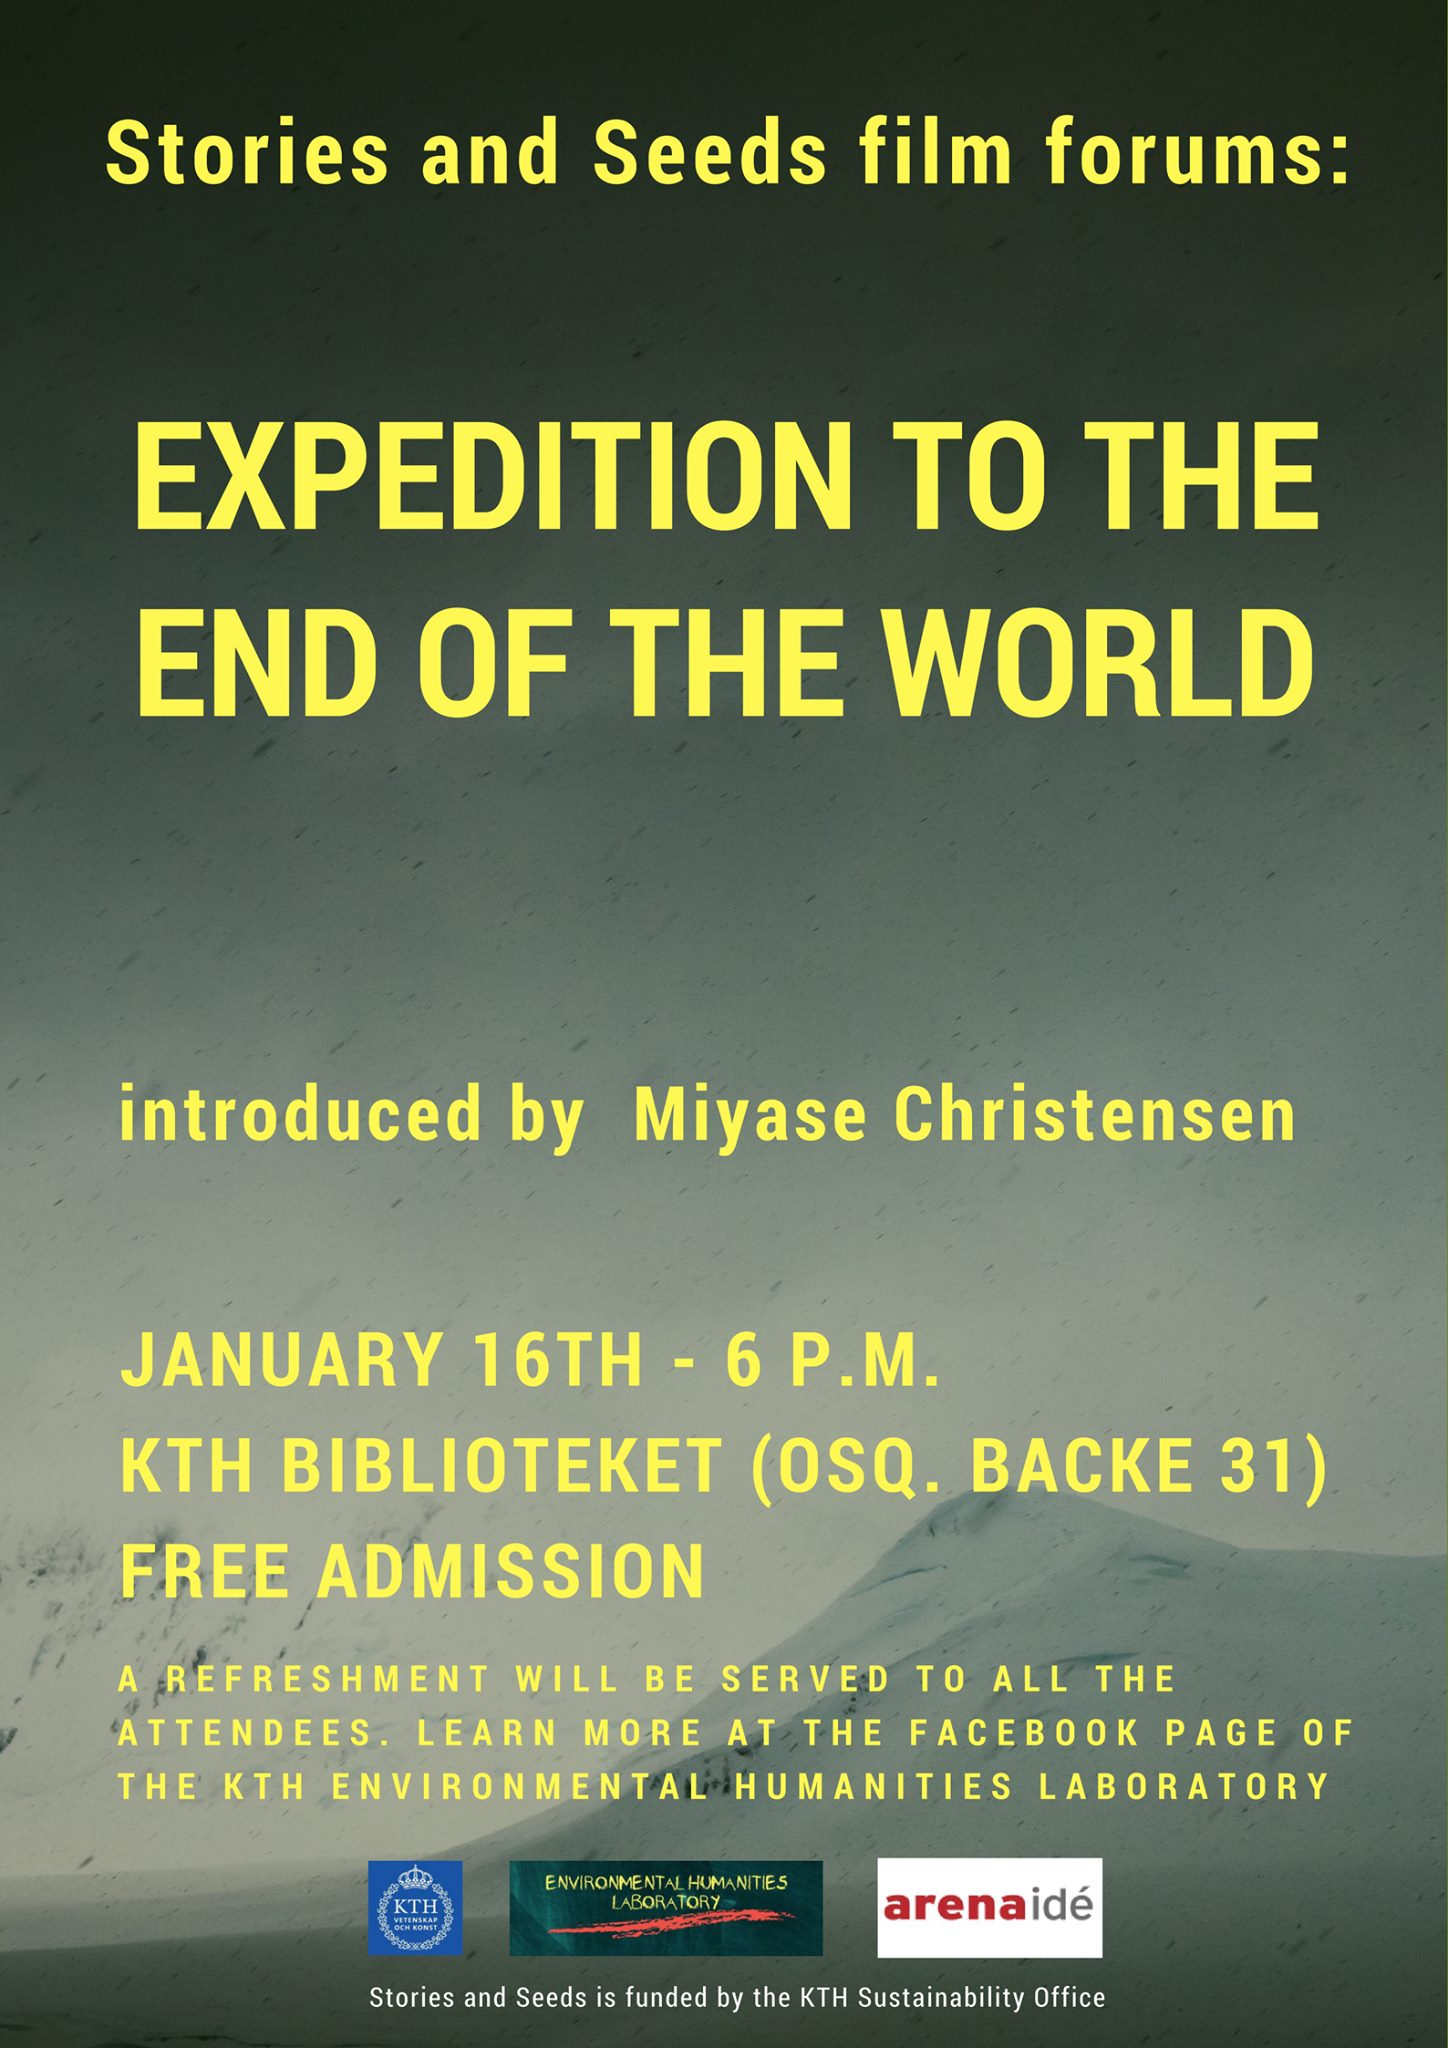 The Expedition To The End Of The World